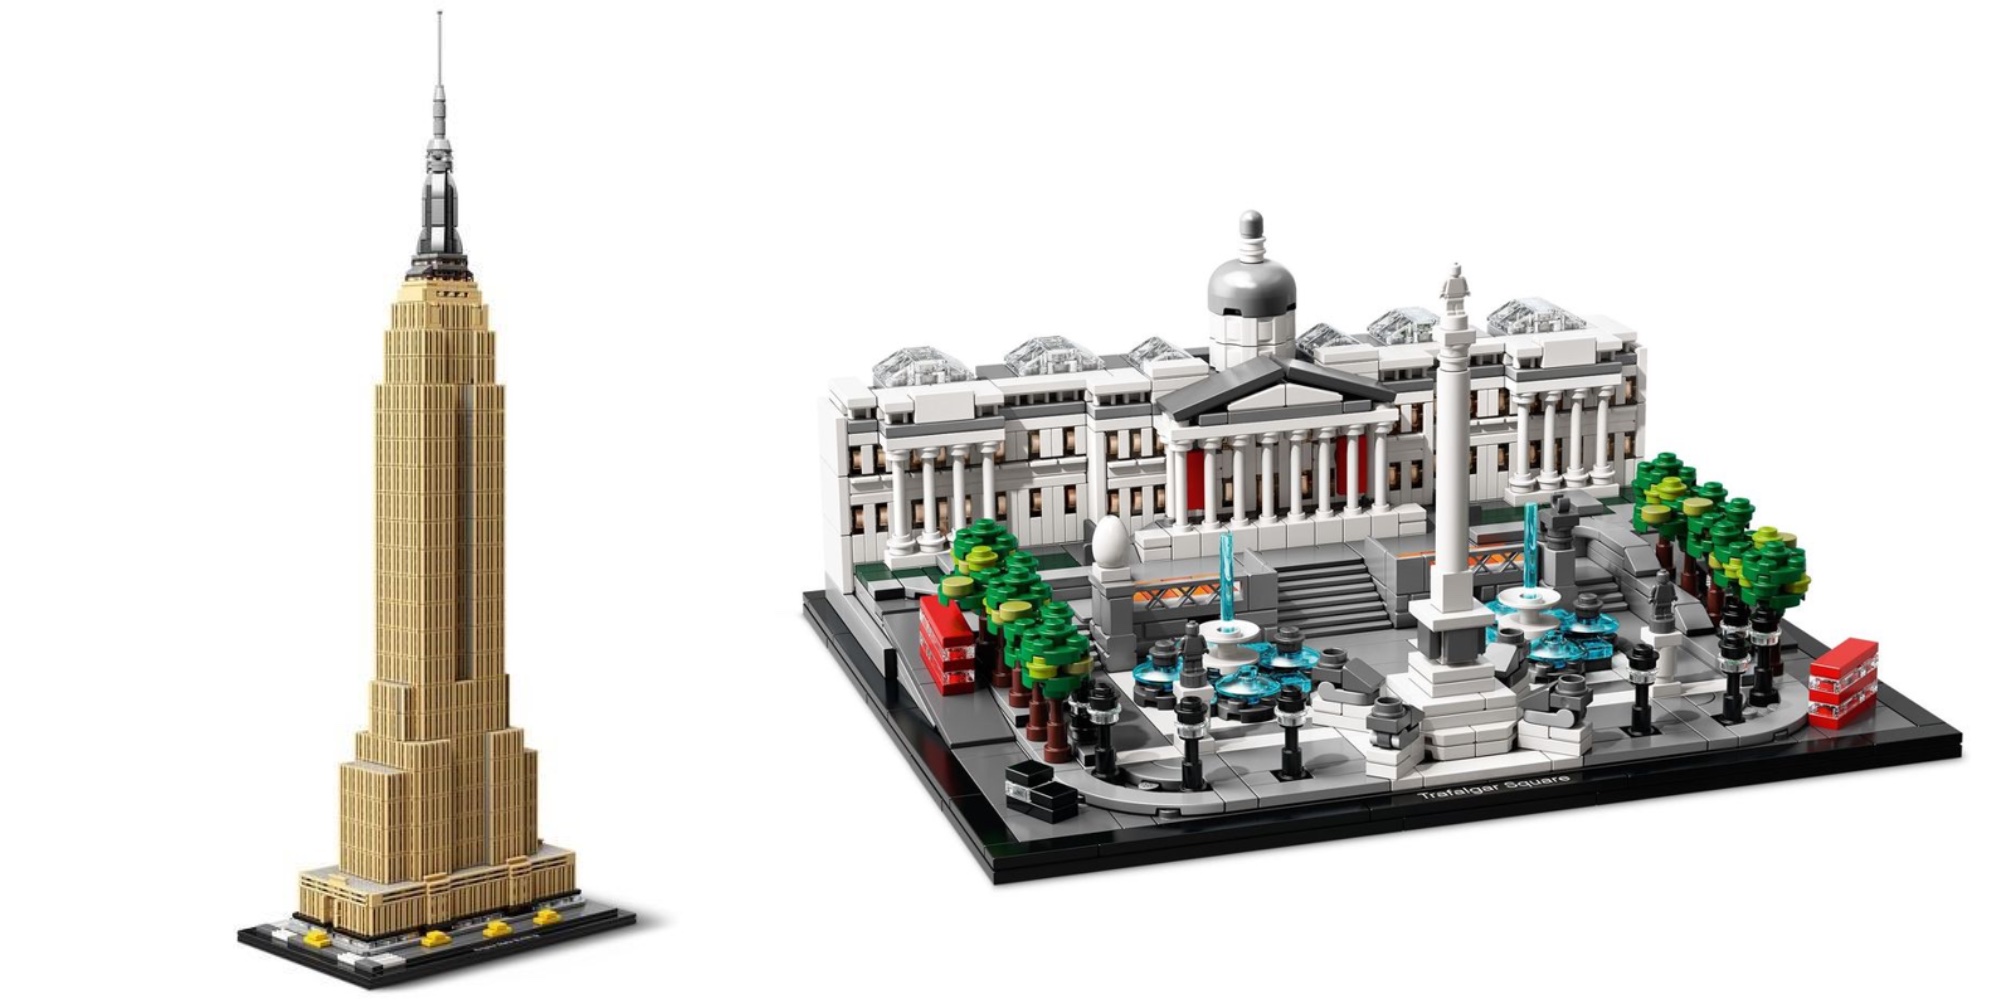 LEGO State joins Architecture line next month 9to5Toys